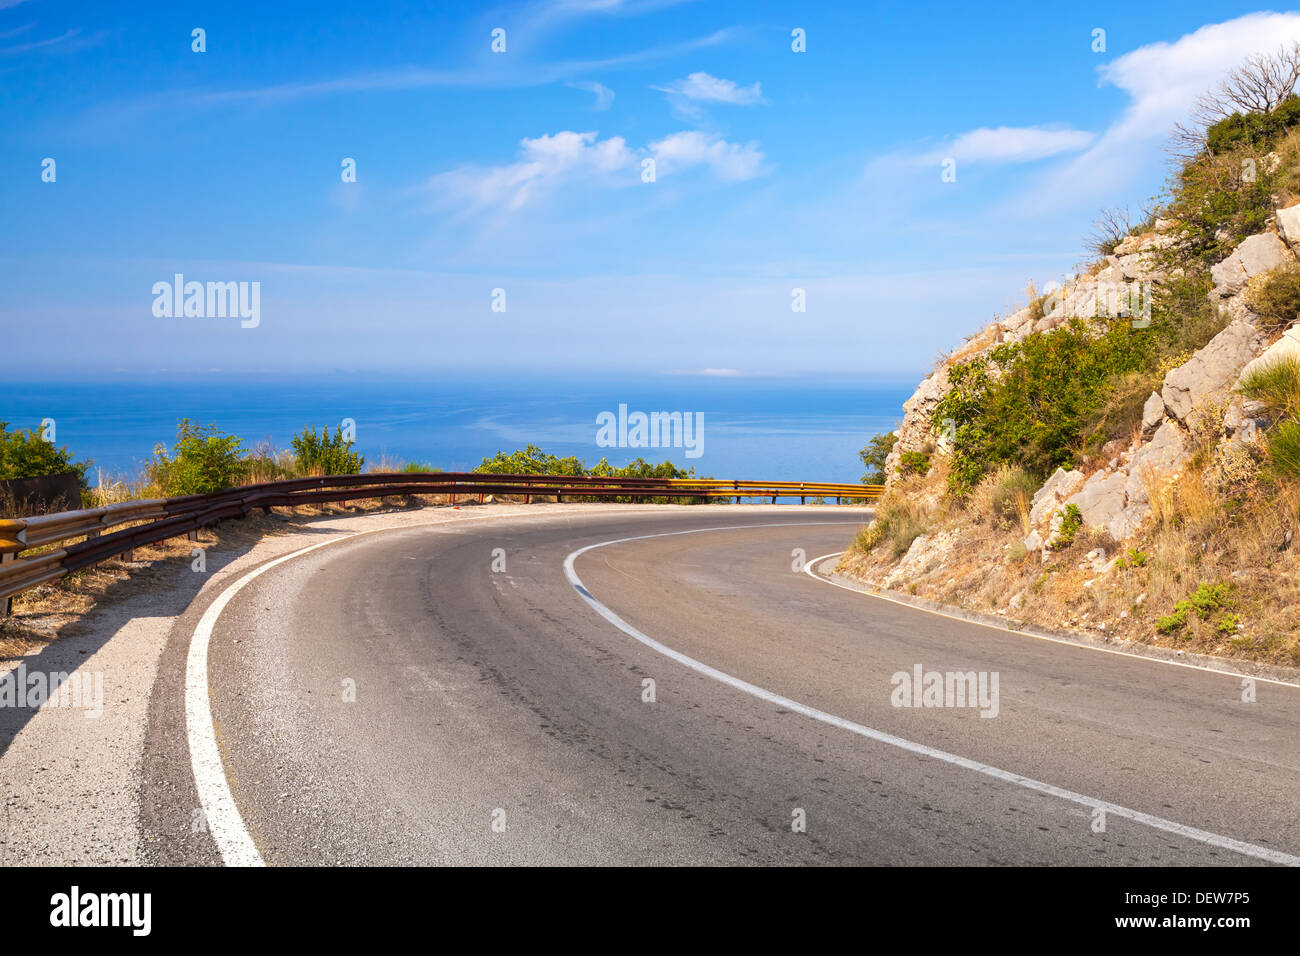 Turn of mountain highway with blue sky and sea on a background Stock Photo